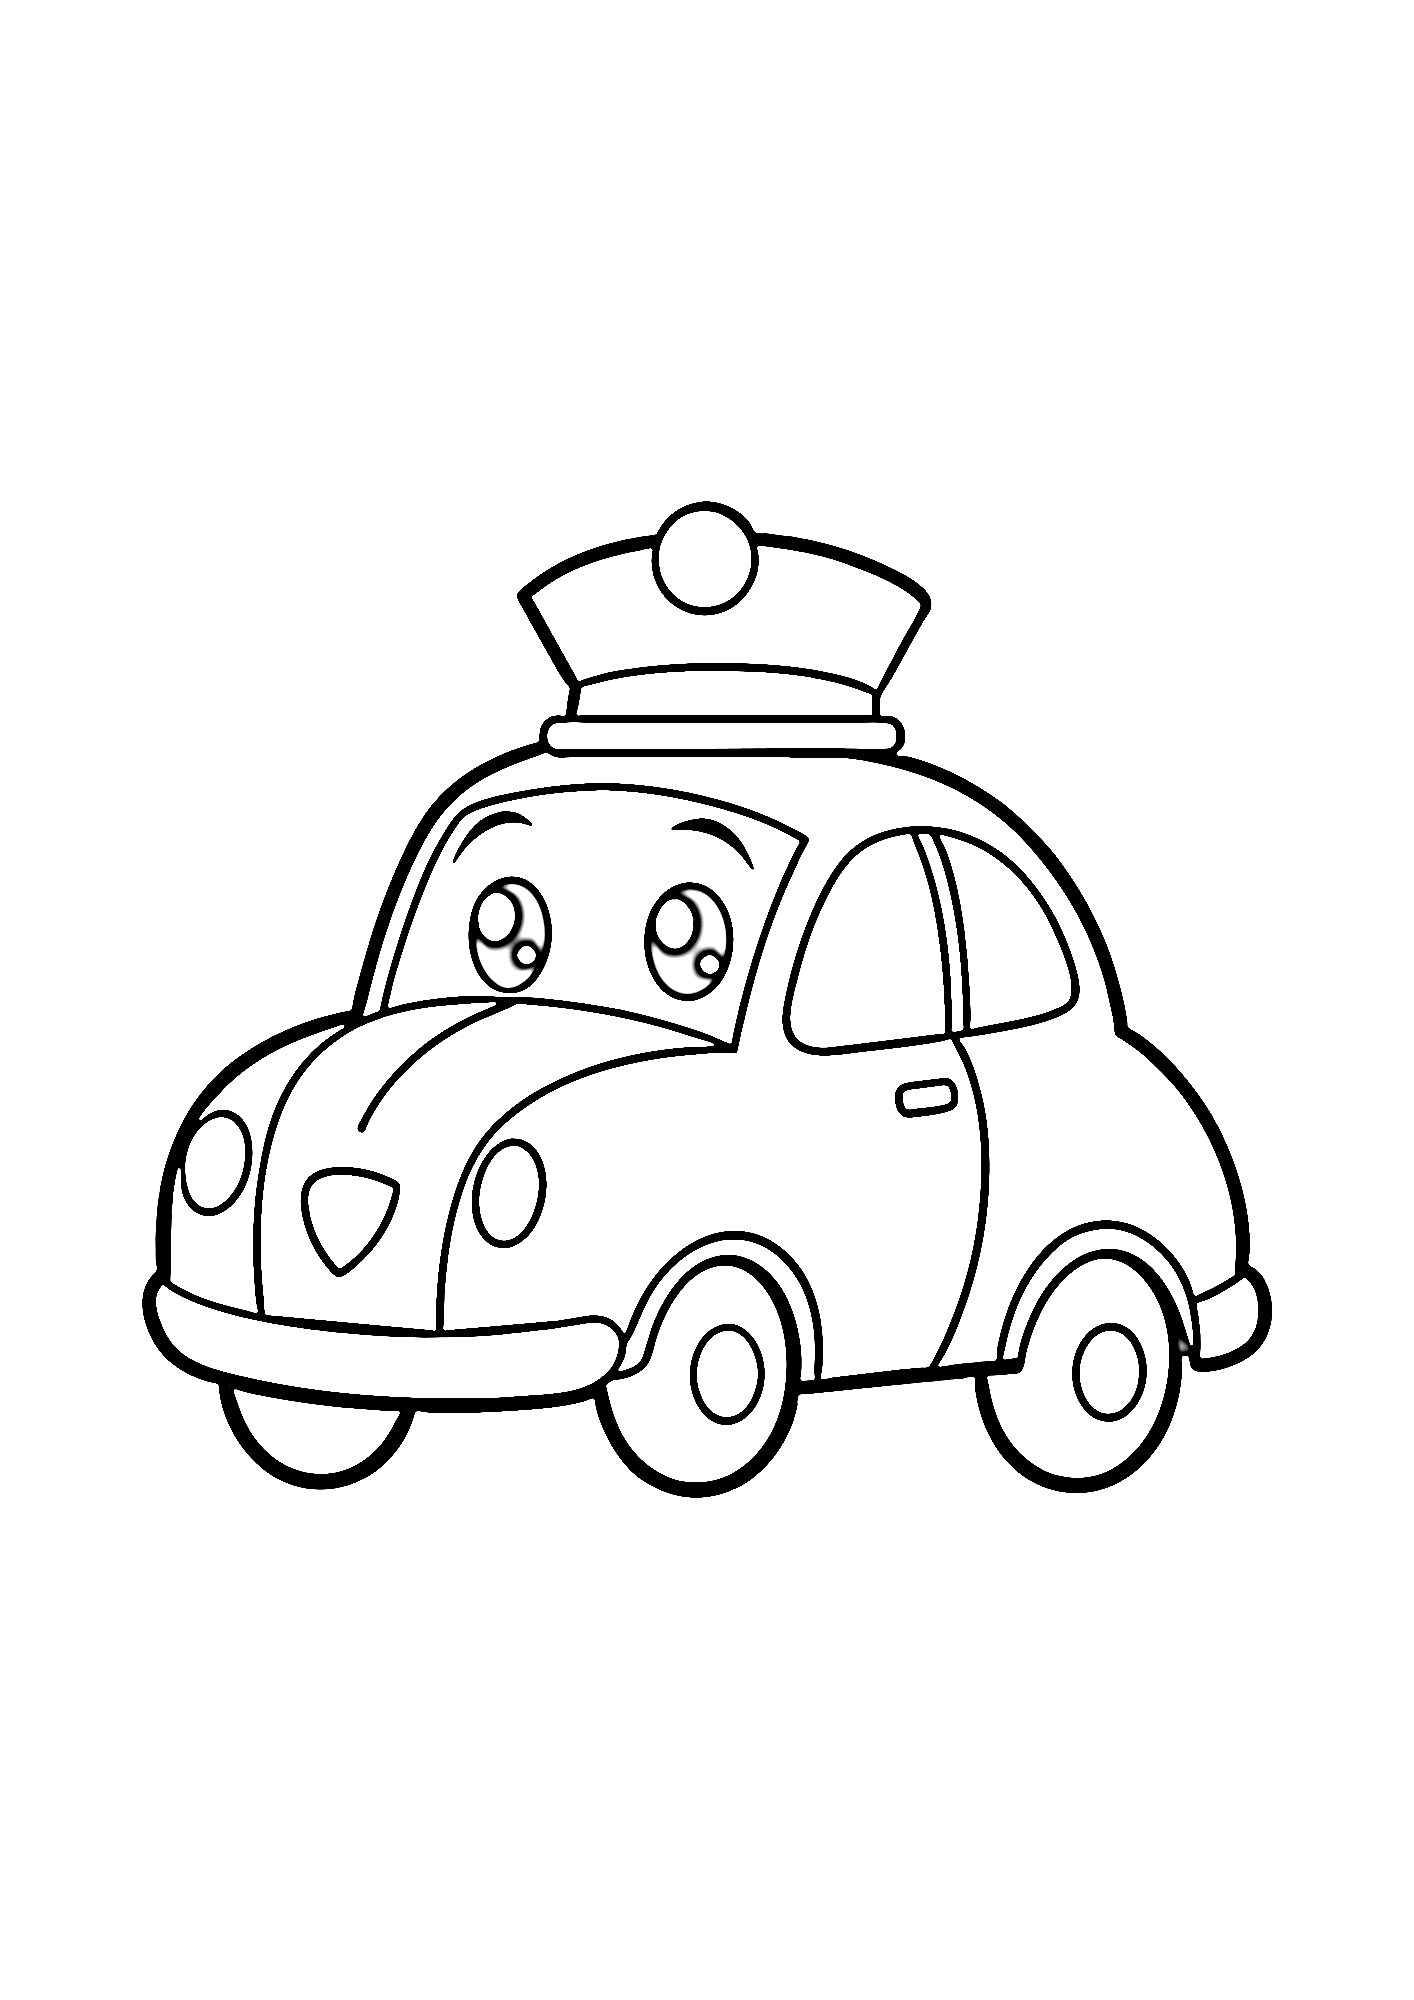 Cute Police car Coloring Pages